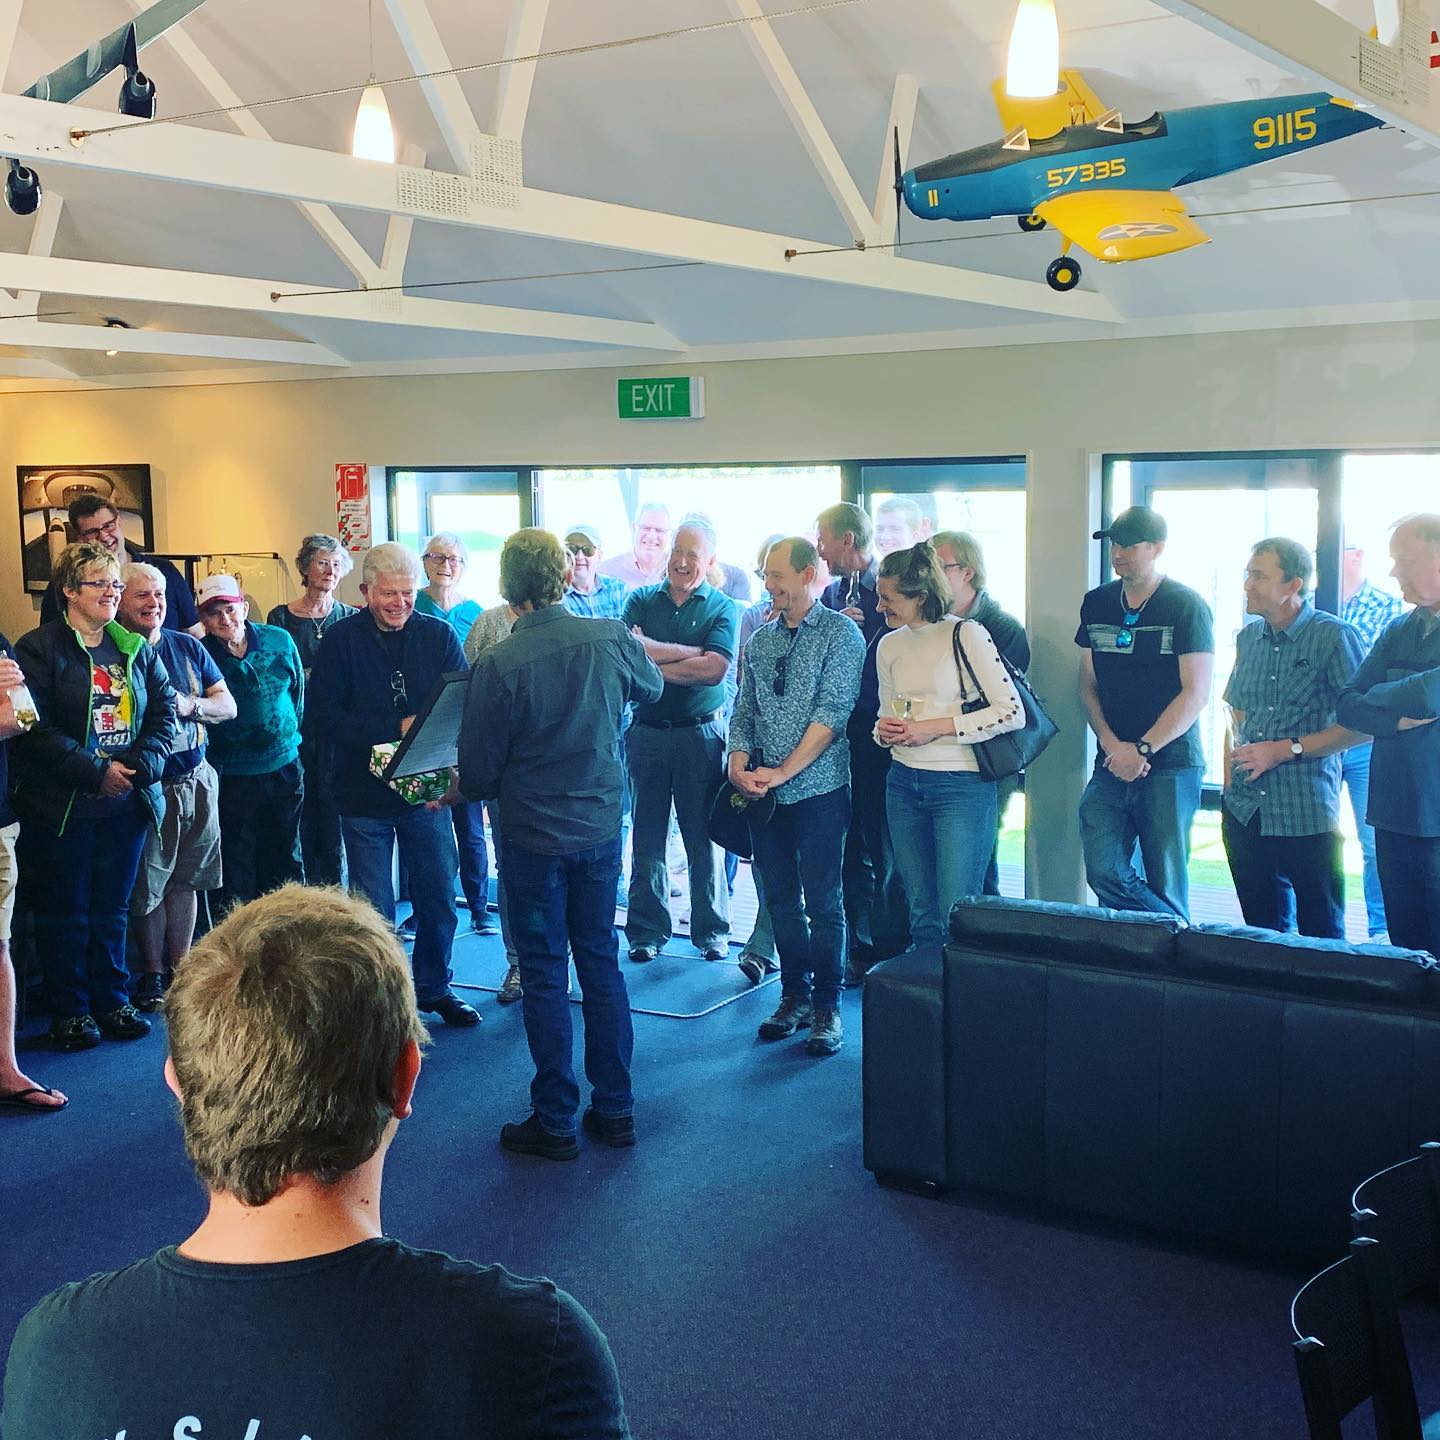 A huge turn out at the club on Saturday evening to farewell the living legend CFI John Harwood. Throughout the years John has lived and breathed the club, looking after our aircraft as if they were his prized personal possessions, while training and mentoring pilots of all ages and experience levels. Thank you John for the hard yards!